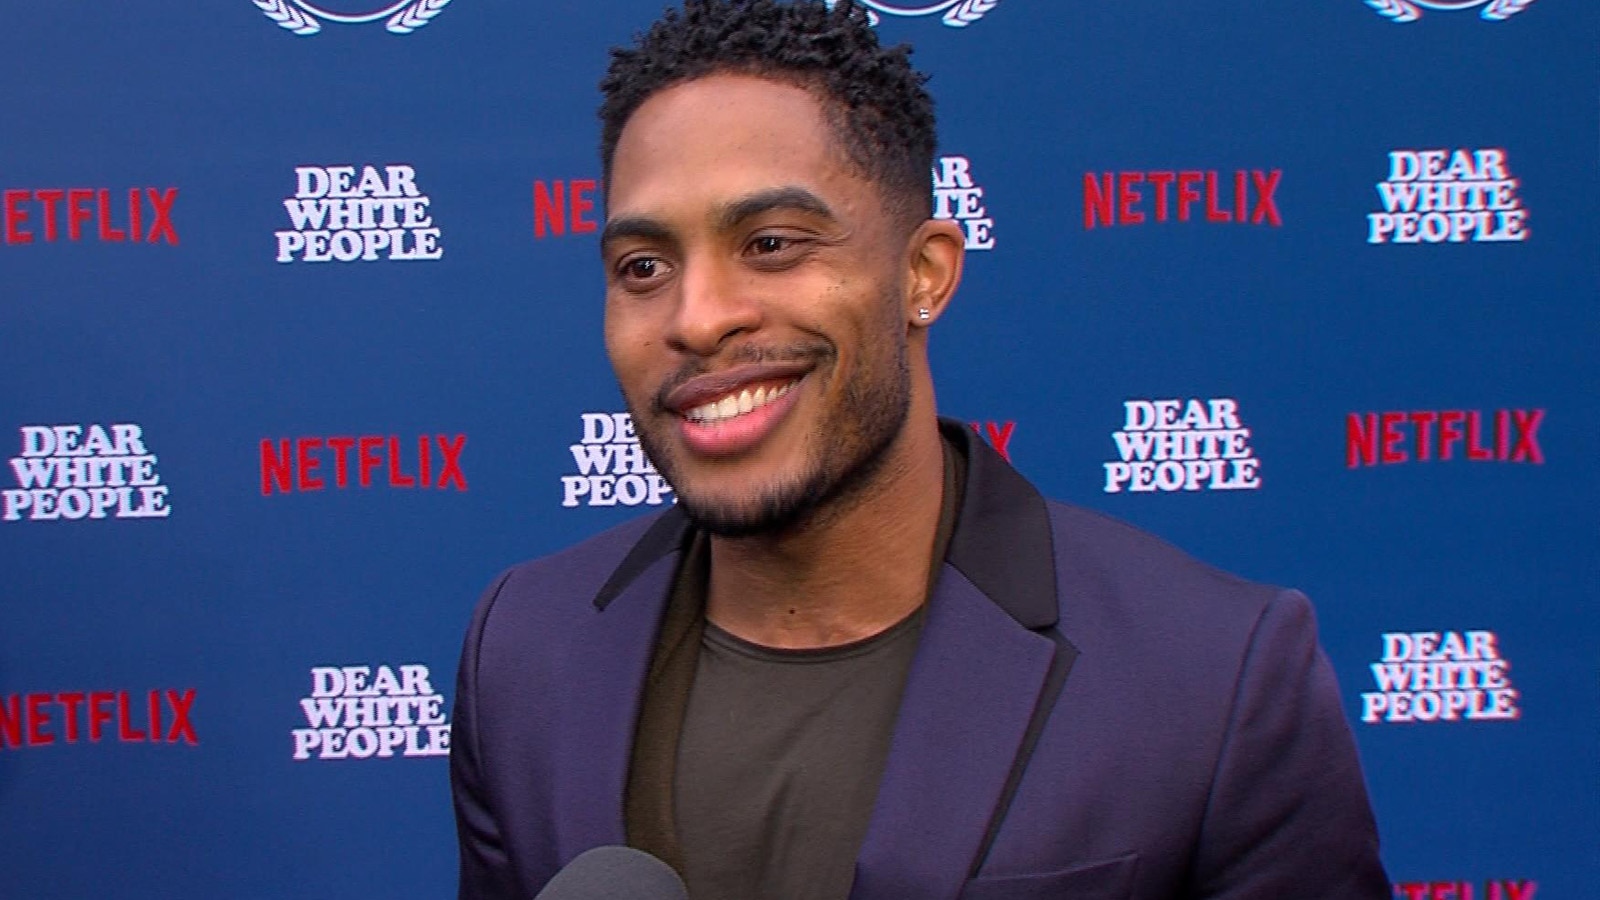 Watch Access Hollywood Interview: 'Dear White People': Brandon P....